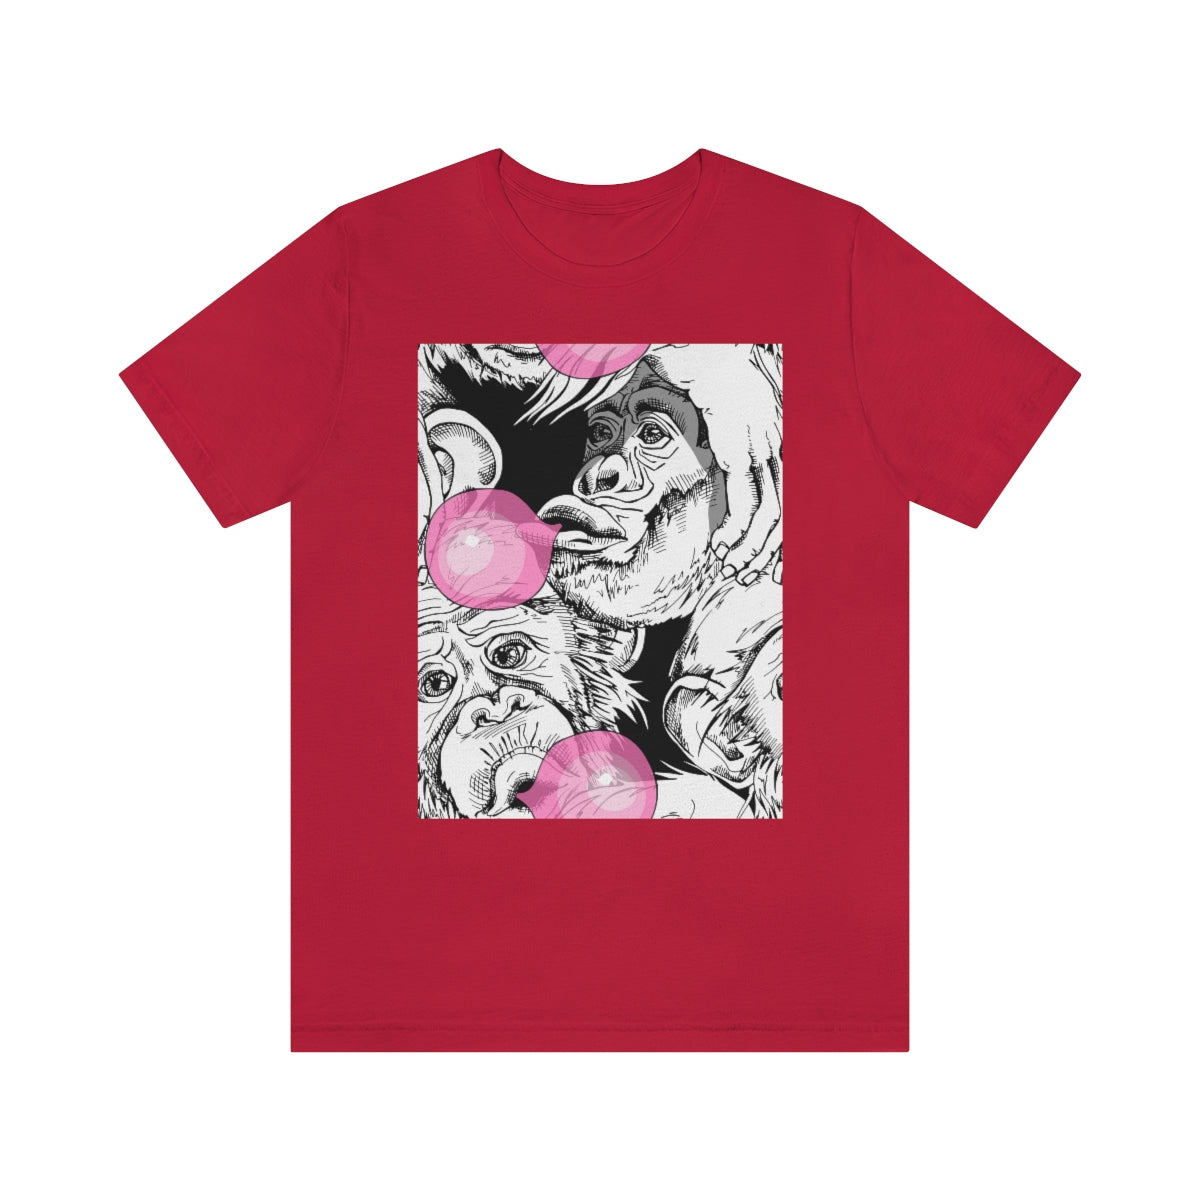 Unisex Jersey Short Sleeve Tee "Funny Monkey with a pink bubble gum"